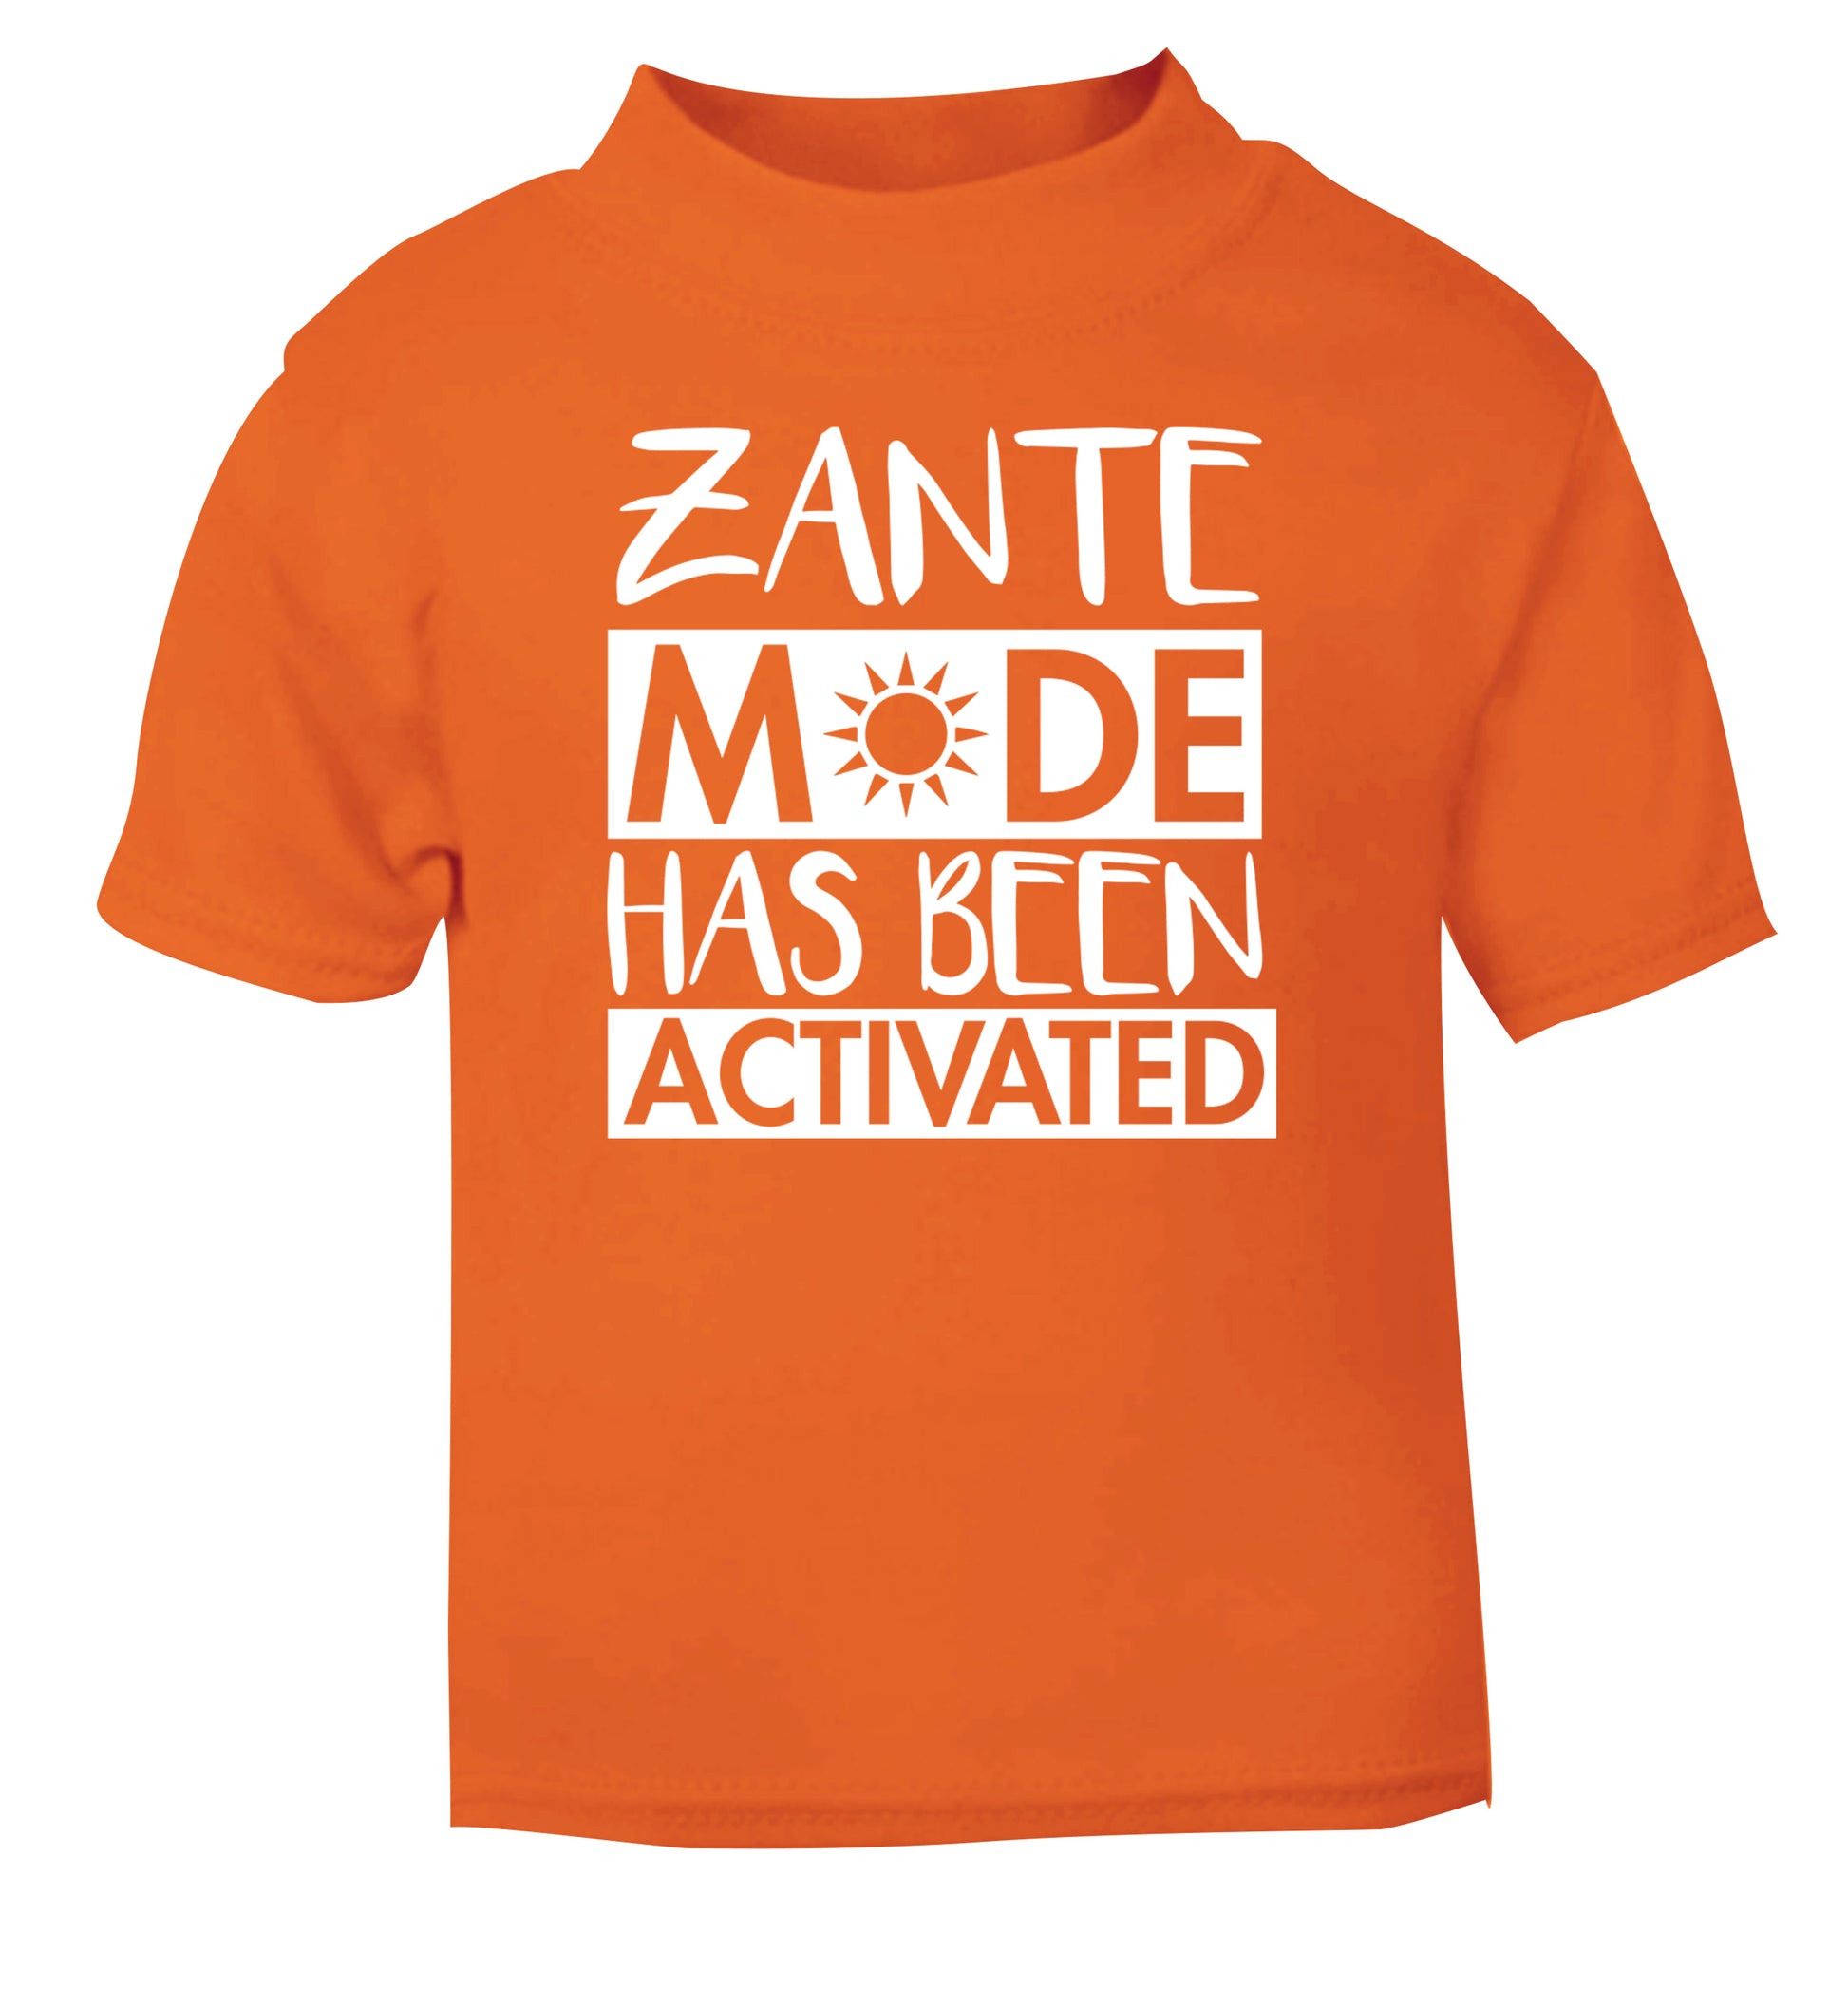 Zante mode has been activated orange Baby Toddler Tshirt 2 Years